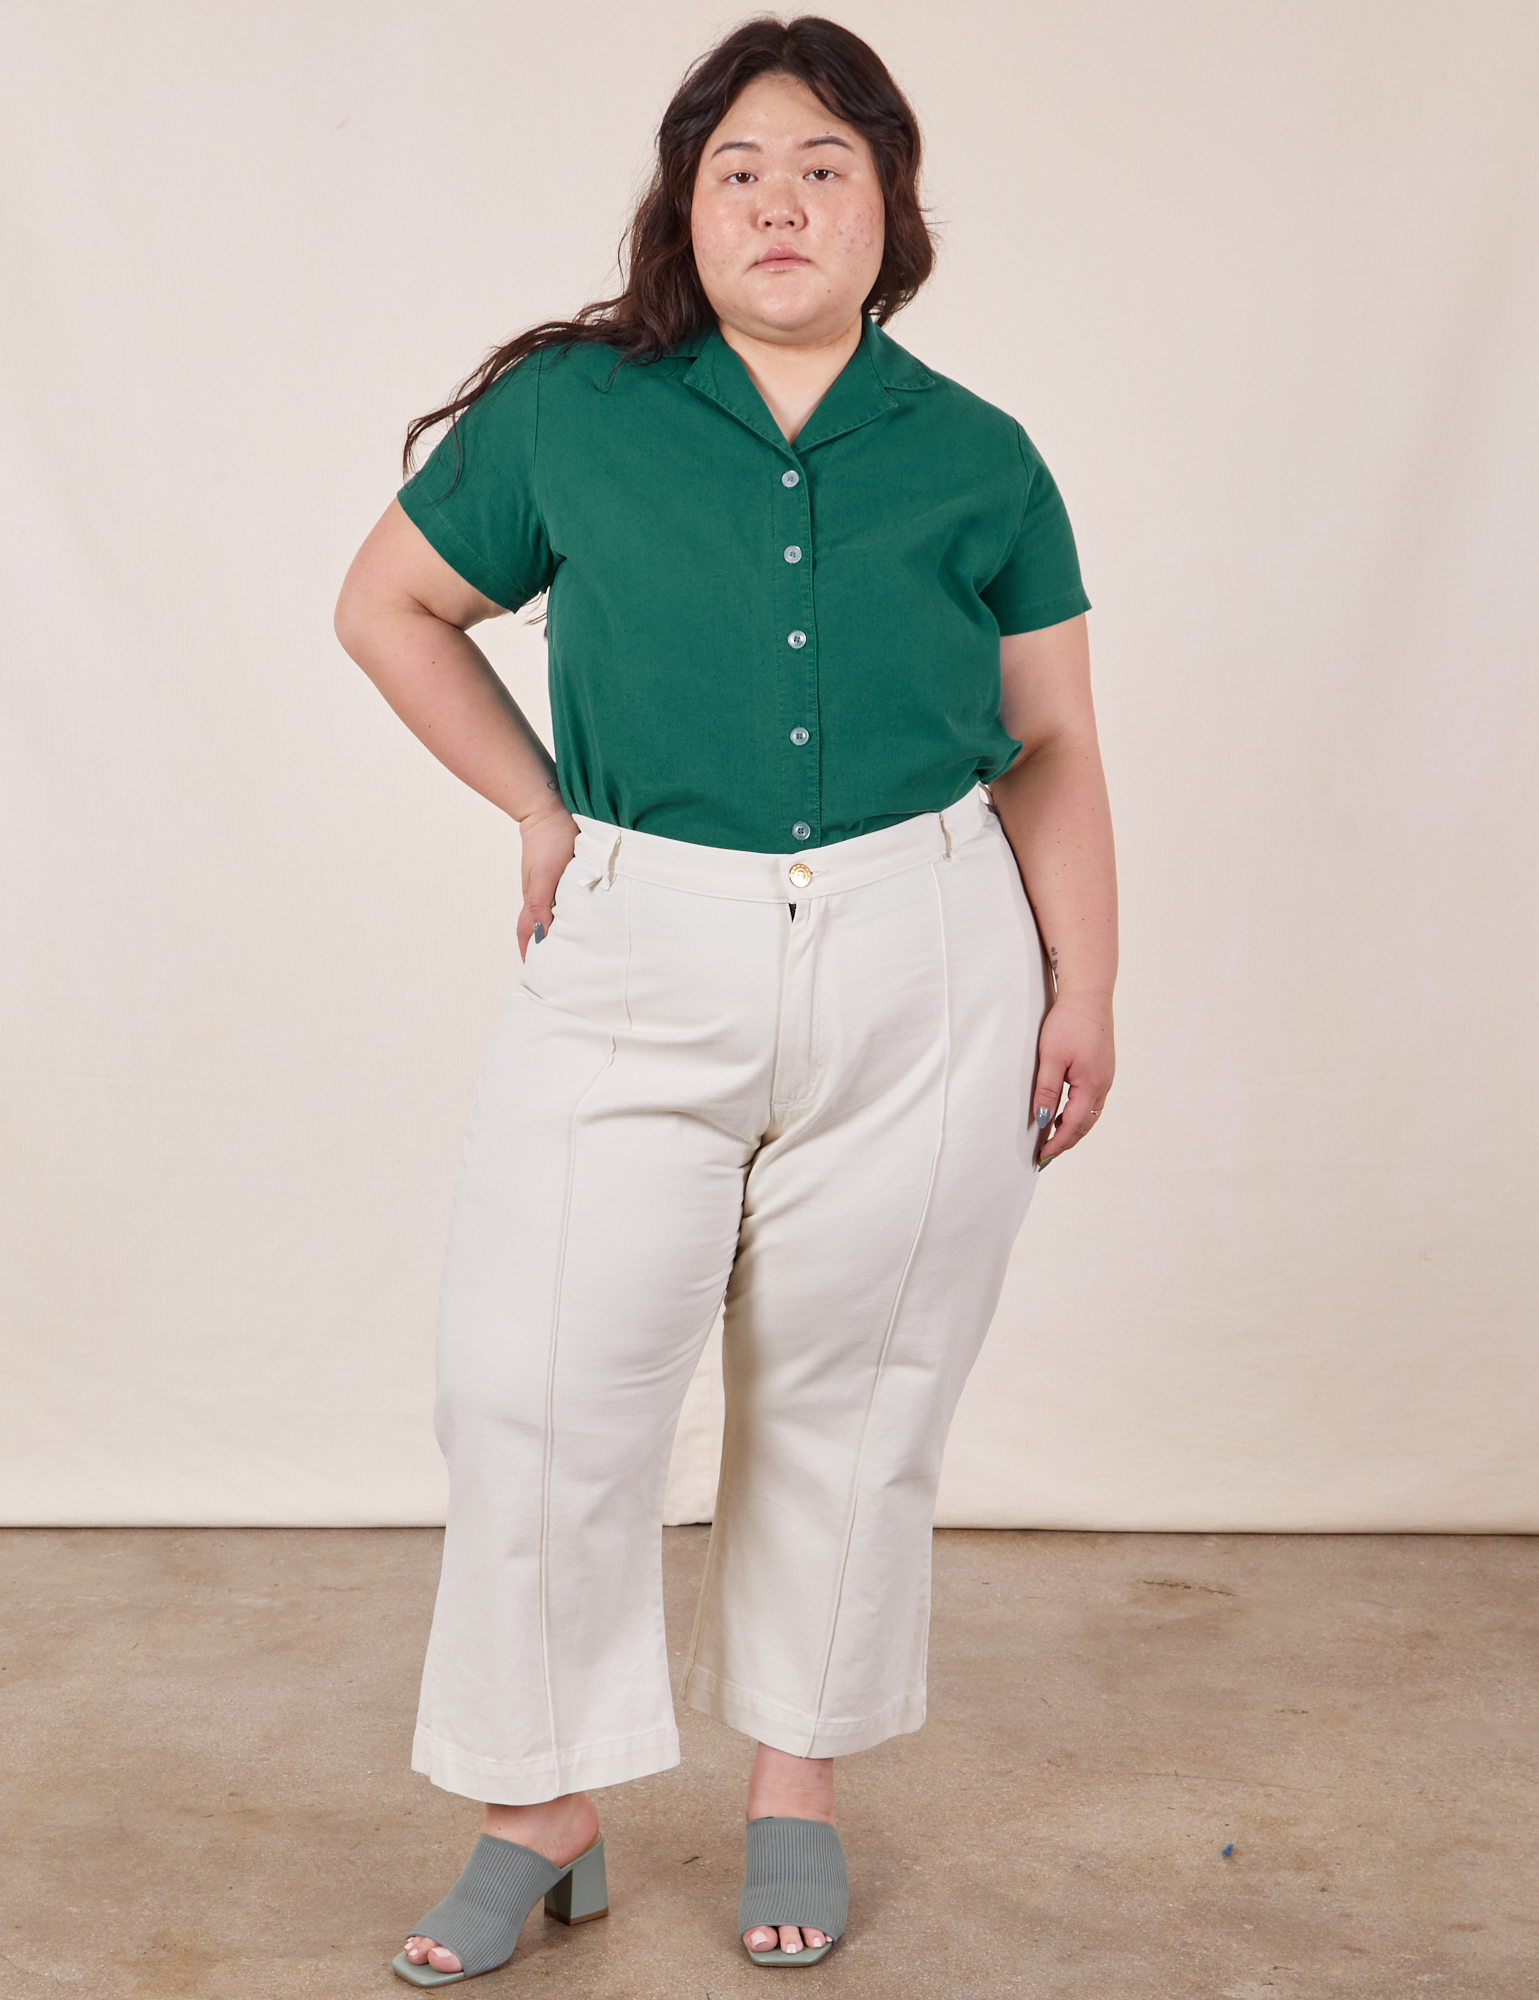 Ashley is wearing Pantry Button-Up in Hunter Green tucked into vintage tee off-white Petite Western Pants